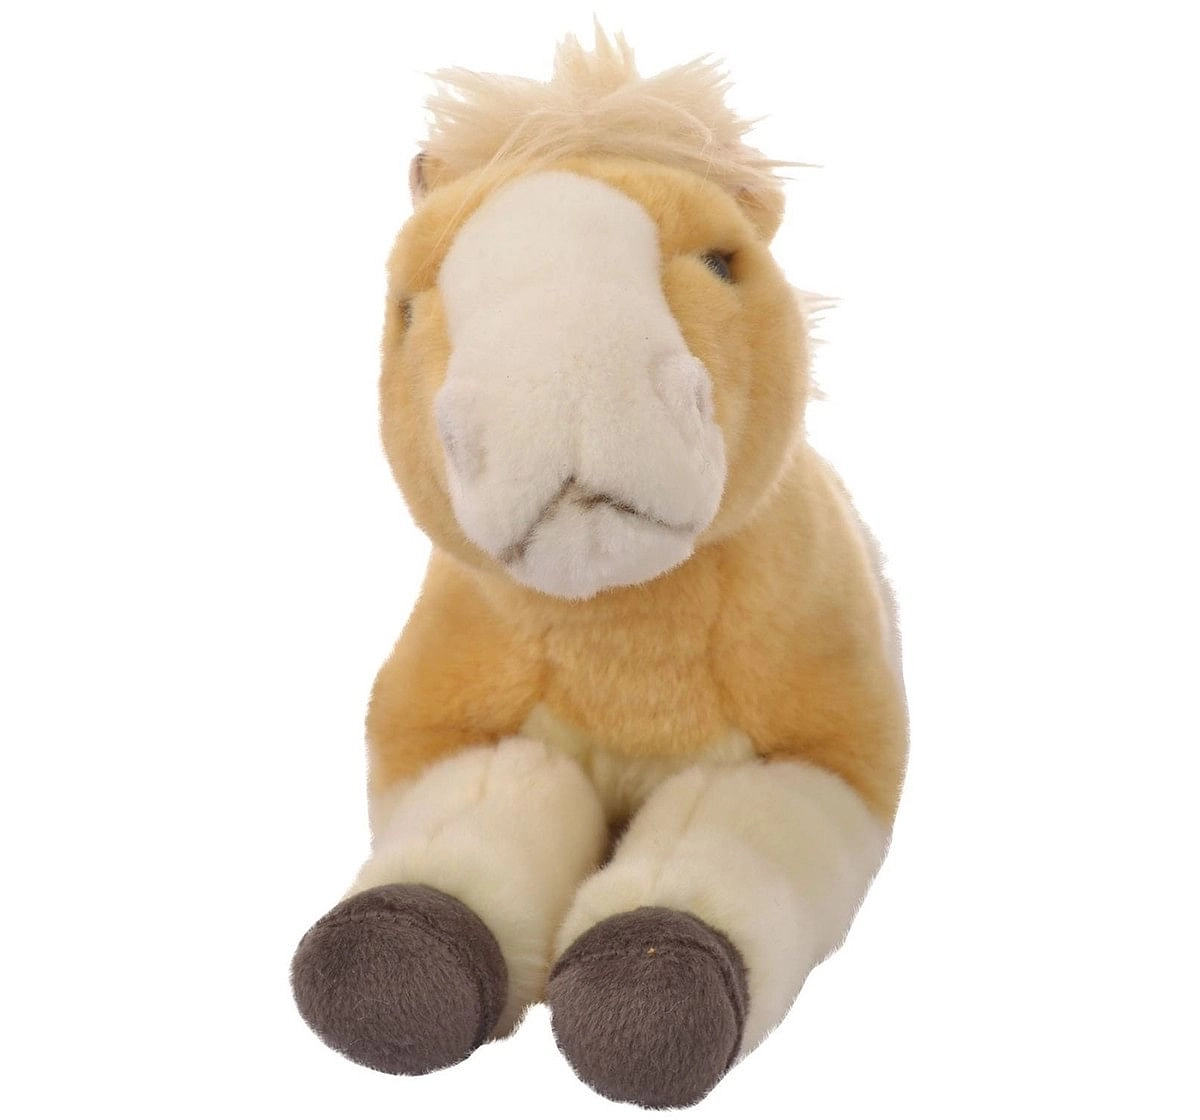 Hamleys Lying Horse Soft Toy (Brown) Animals & Birds for Kids age 0M+ - 14 Cm 